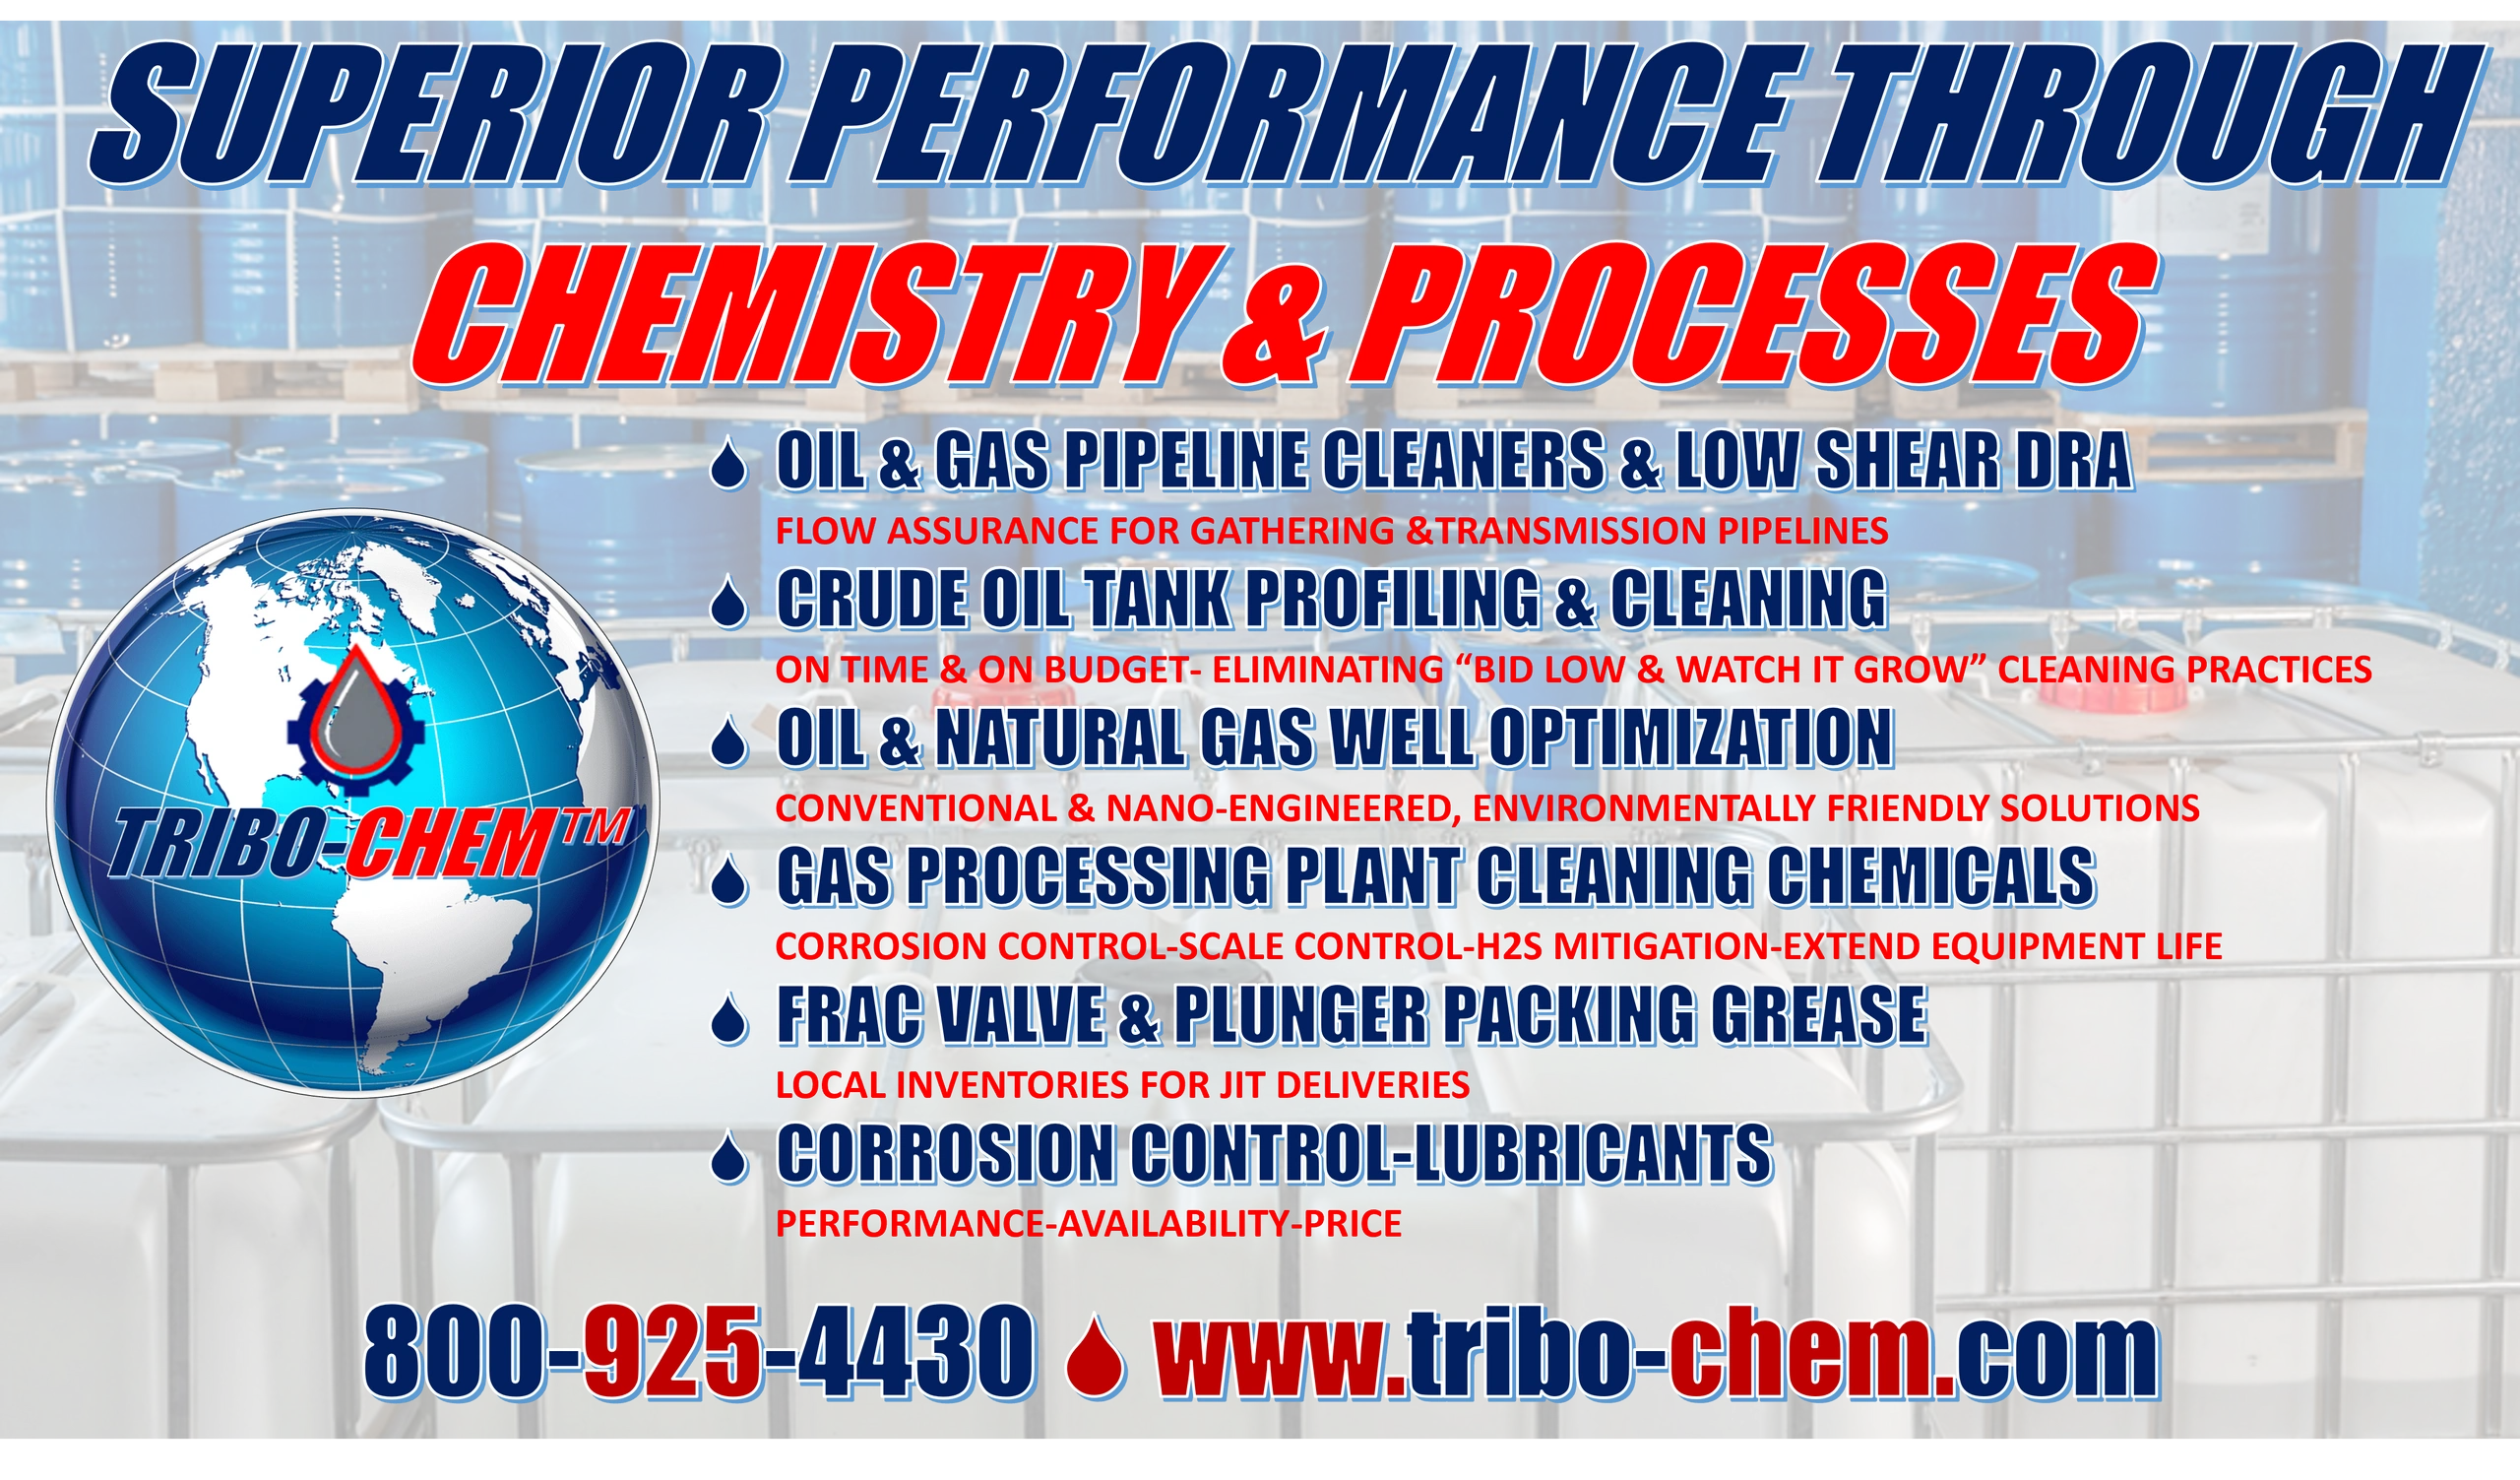 TRIBO-CHEM - Lubricants, Lubricants, Oilfield, Grease